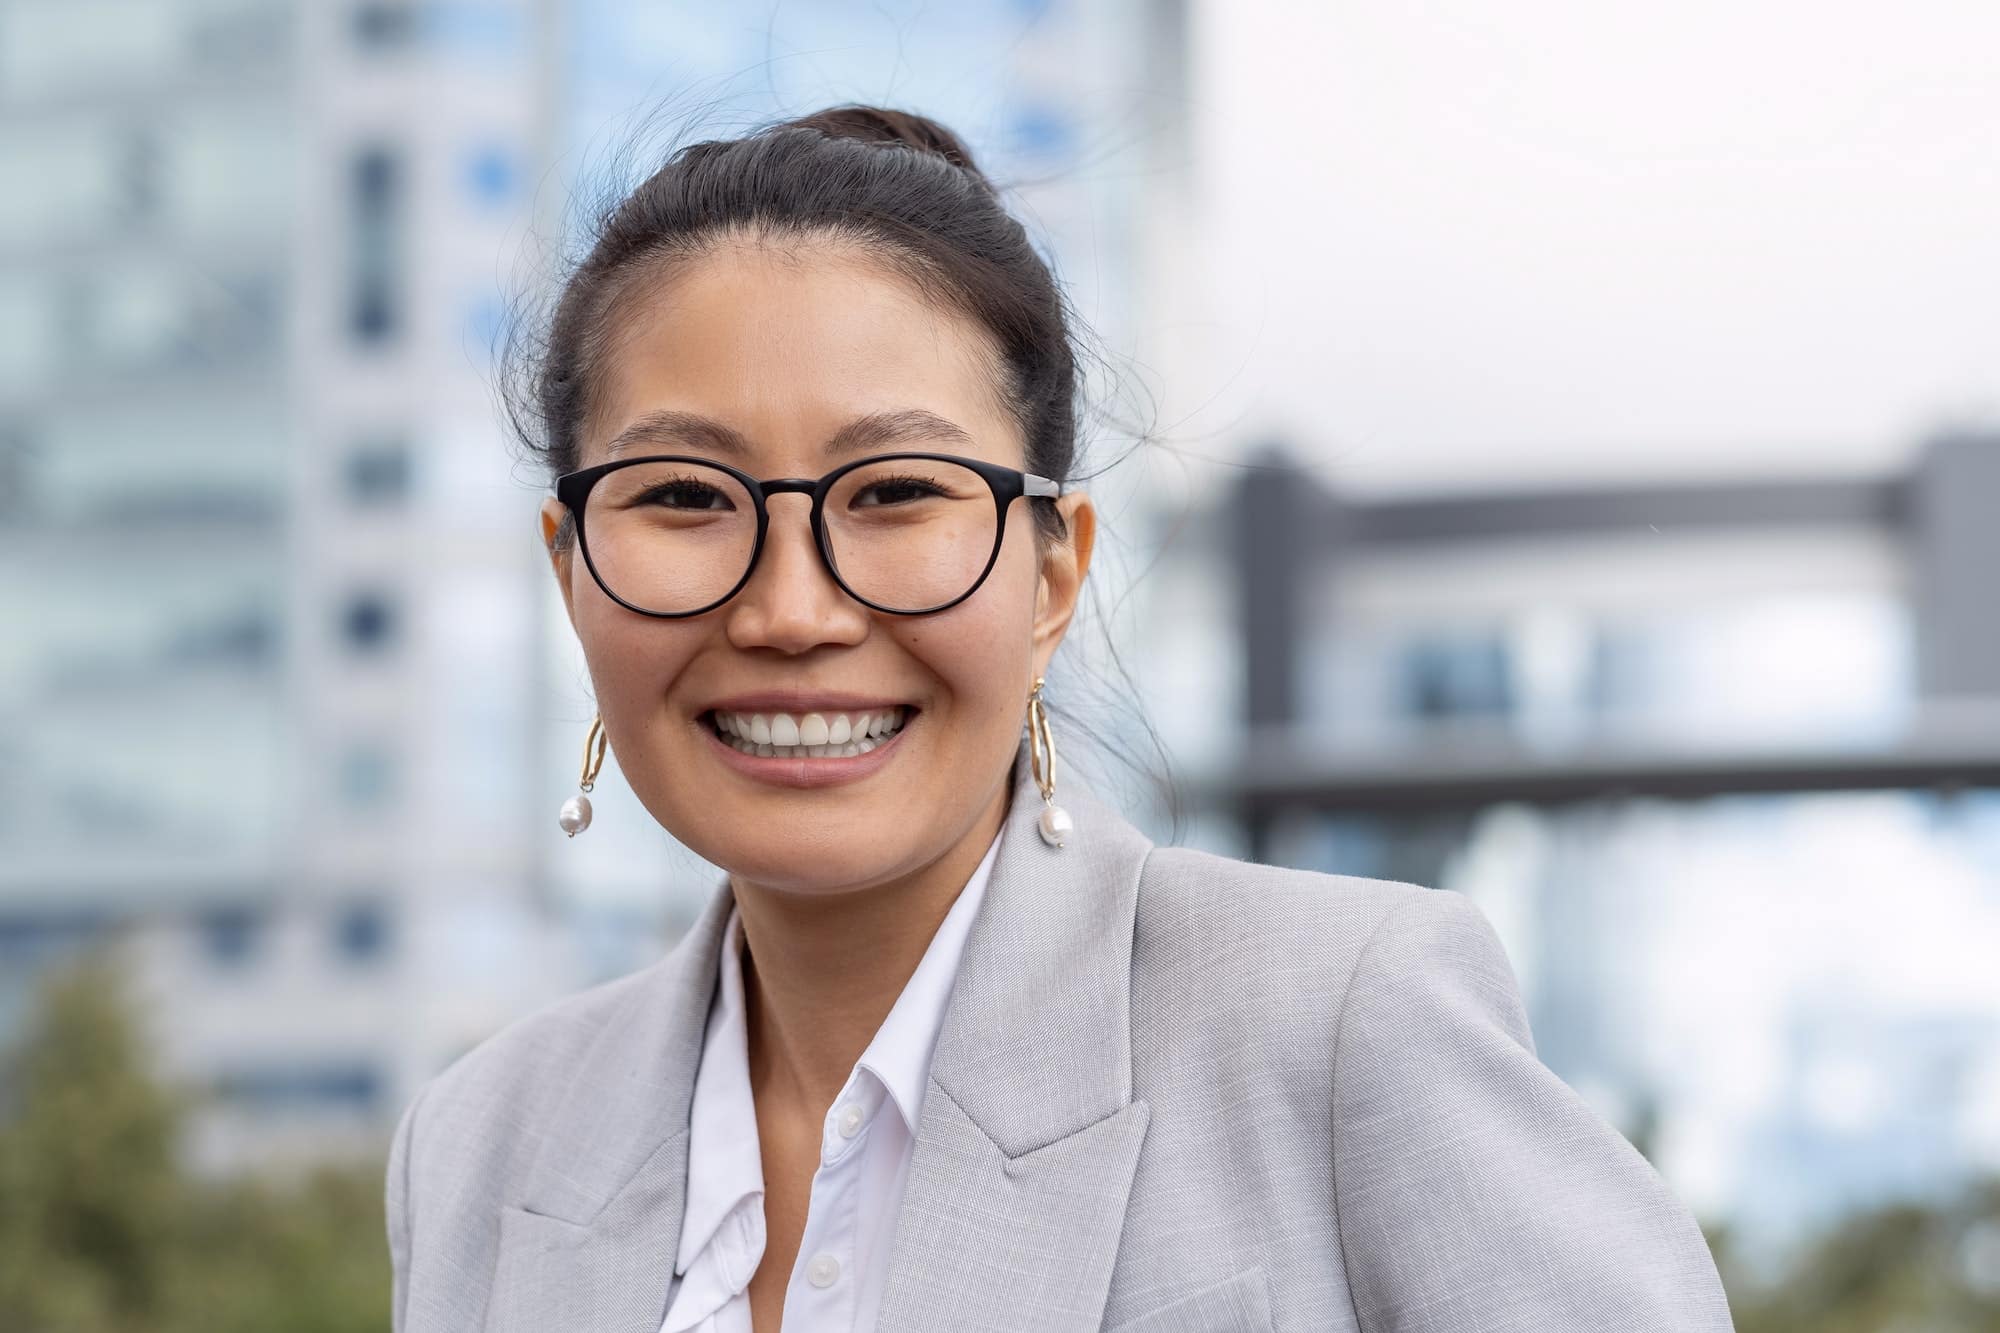 Young cheerful businesswoman in eyeglasses and grey suit